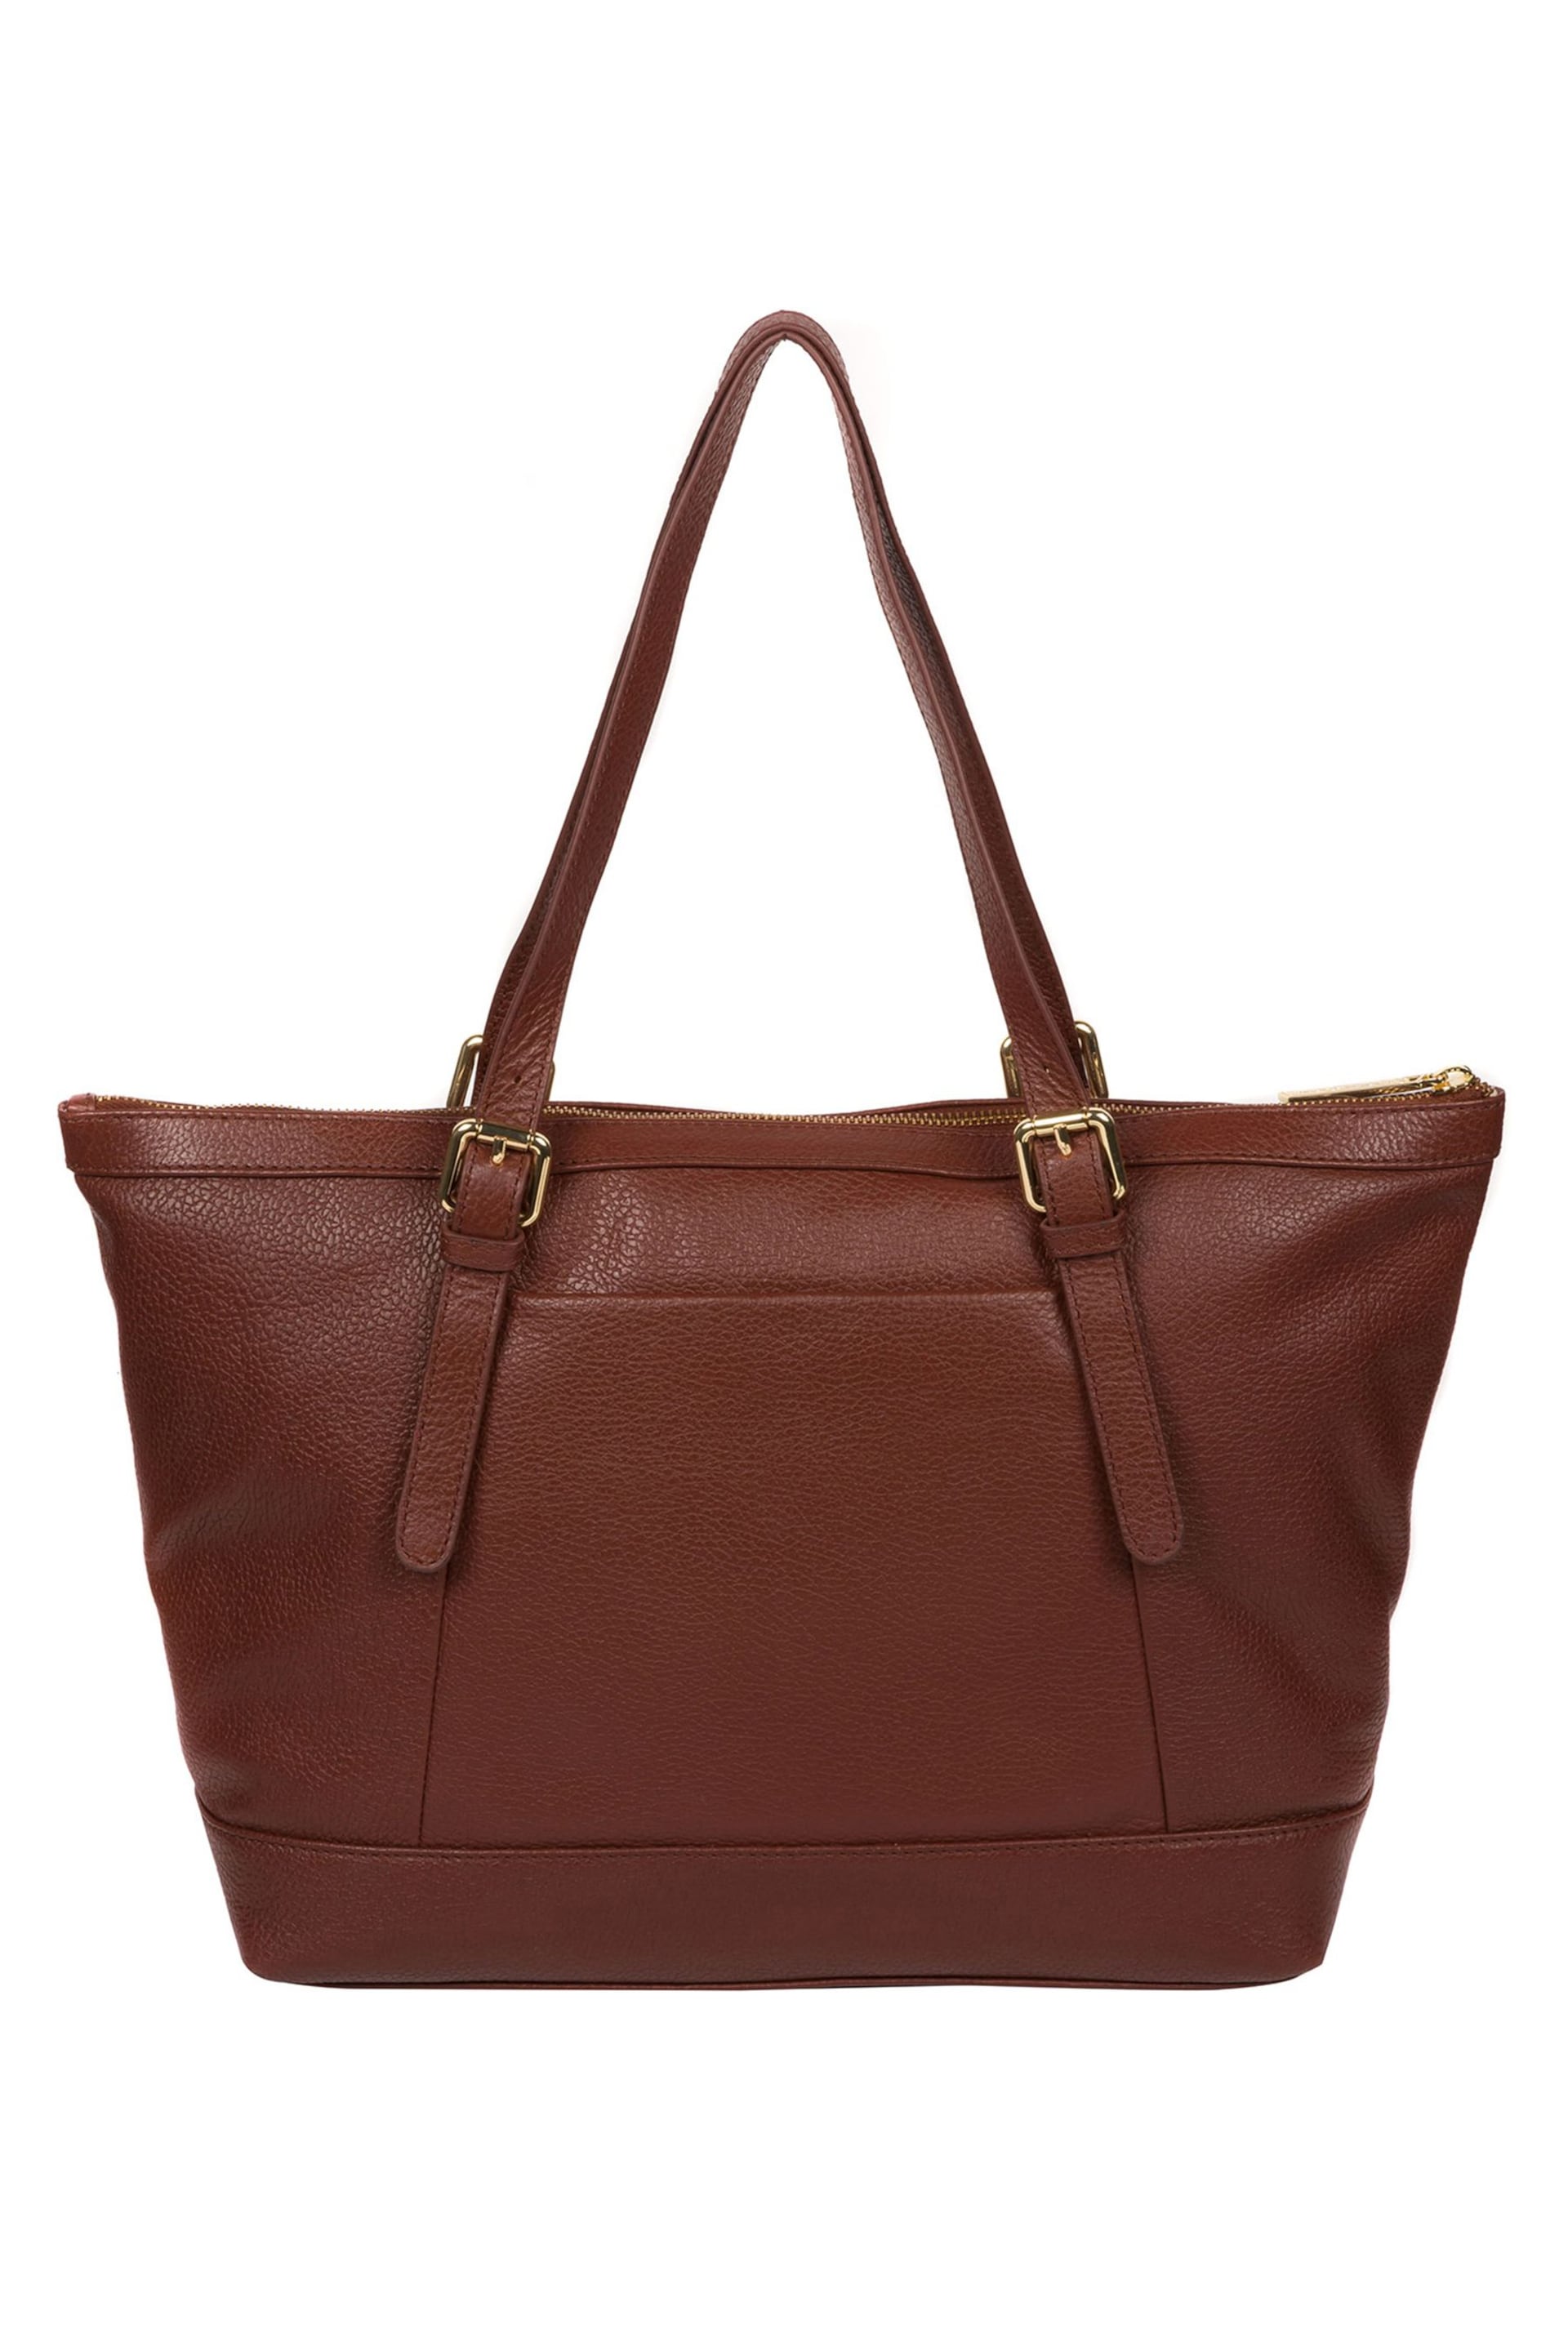 Pure Luxuries London Emily Leather Tote Bag - Image 2 of 5